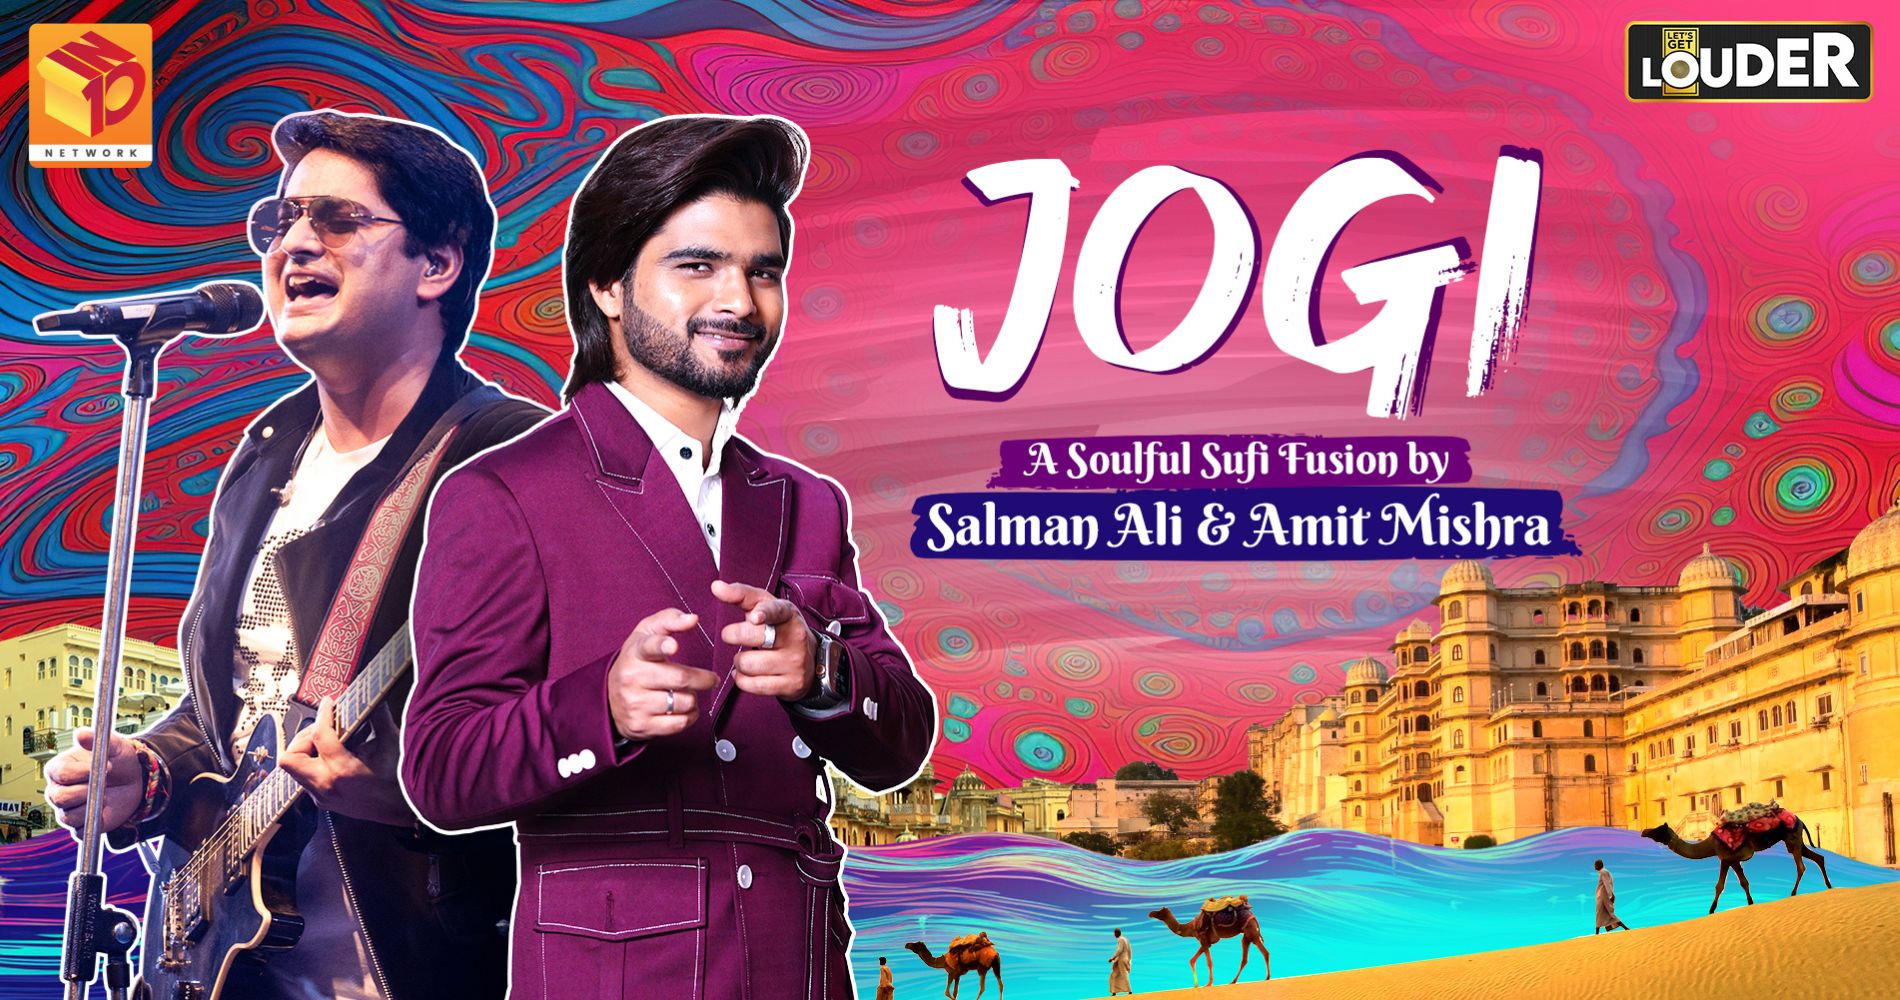 Let's Get LOUDER Sufi Masterpiece ‘Jogi’ By Salman Ali And Amit Mishra Wins Millions Of Hearts